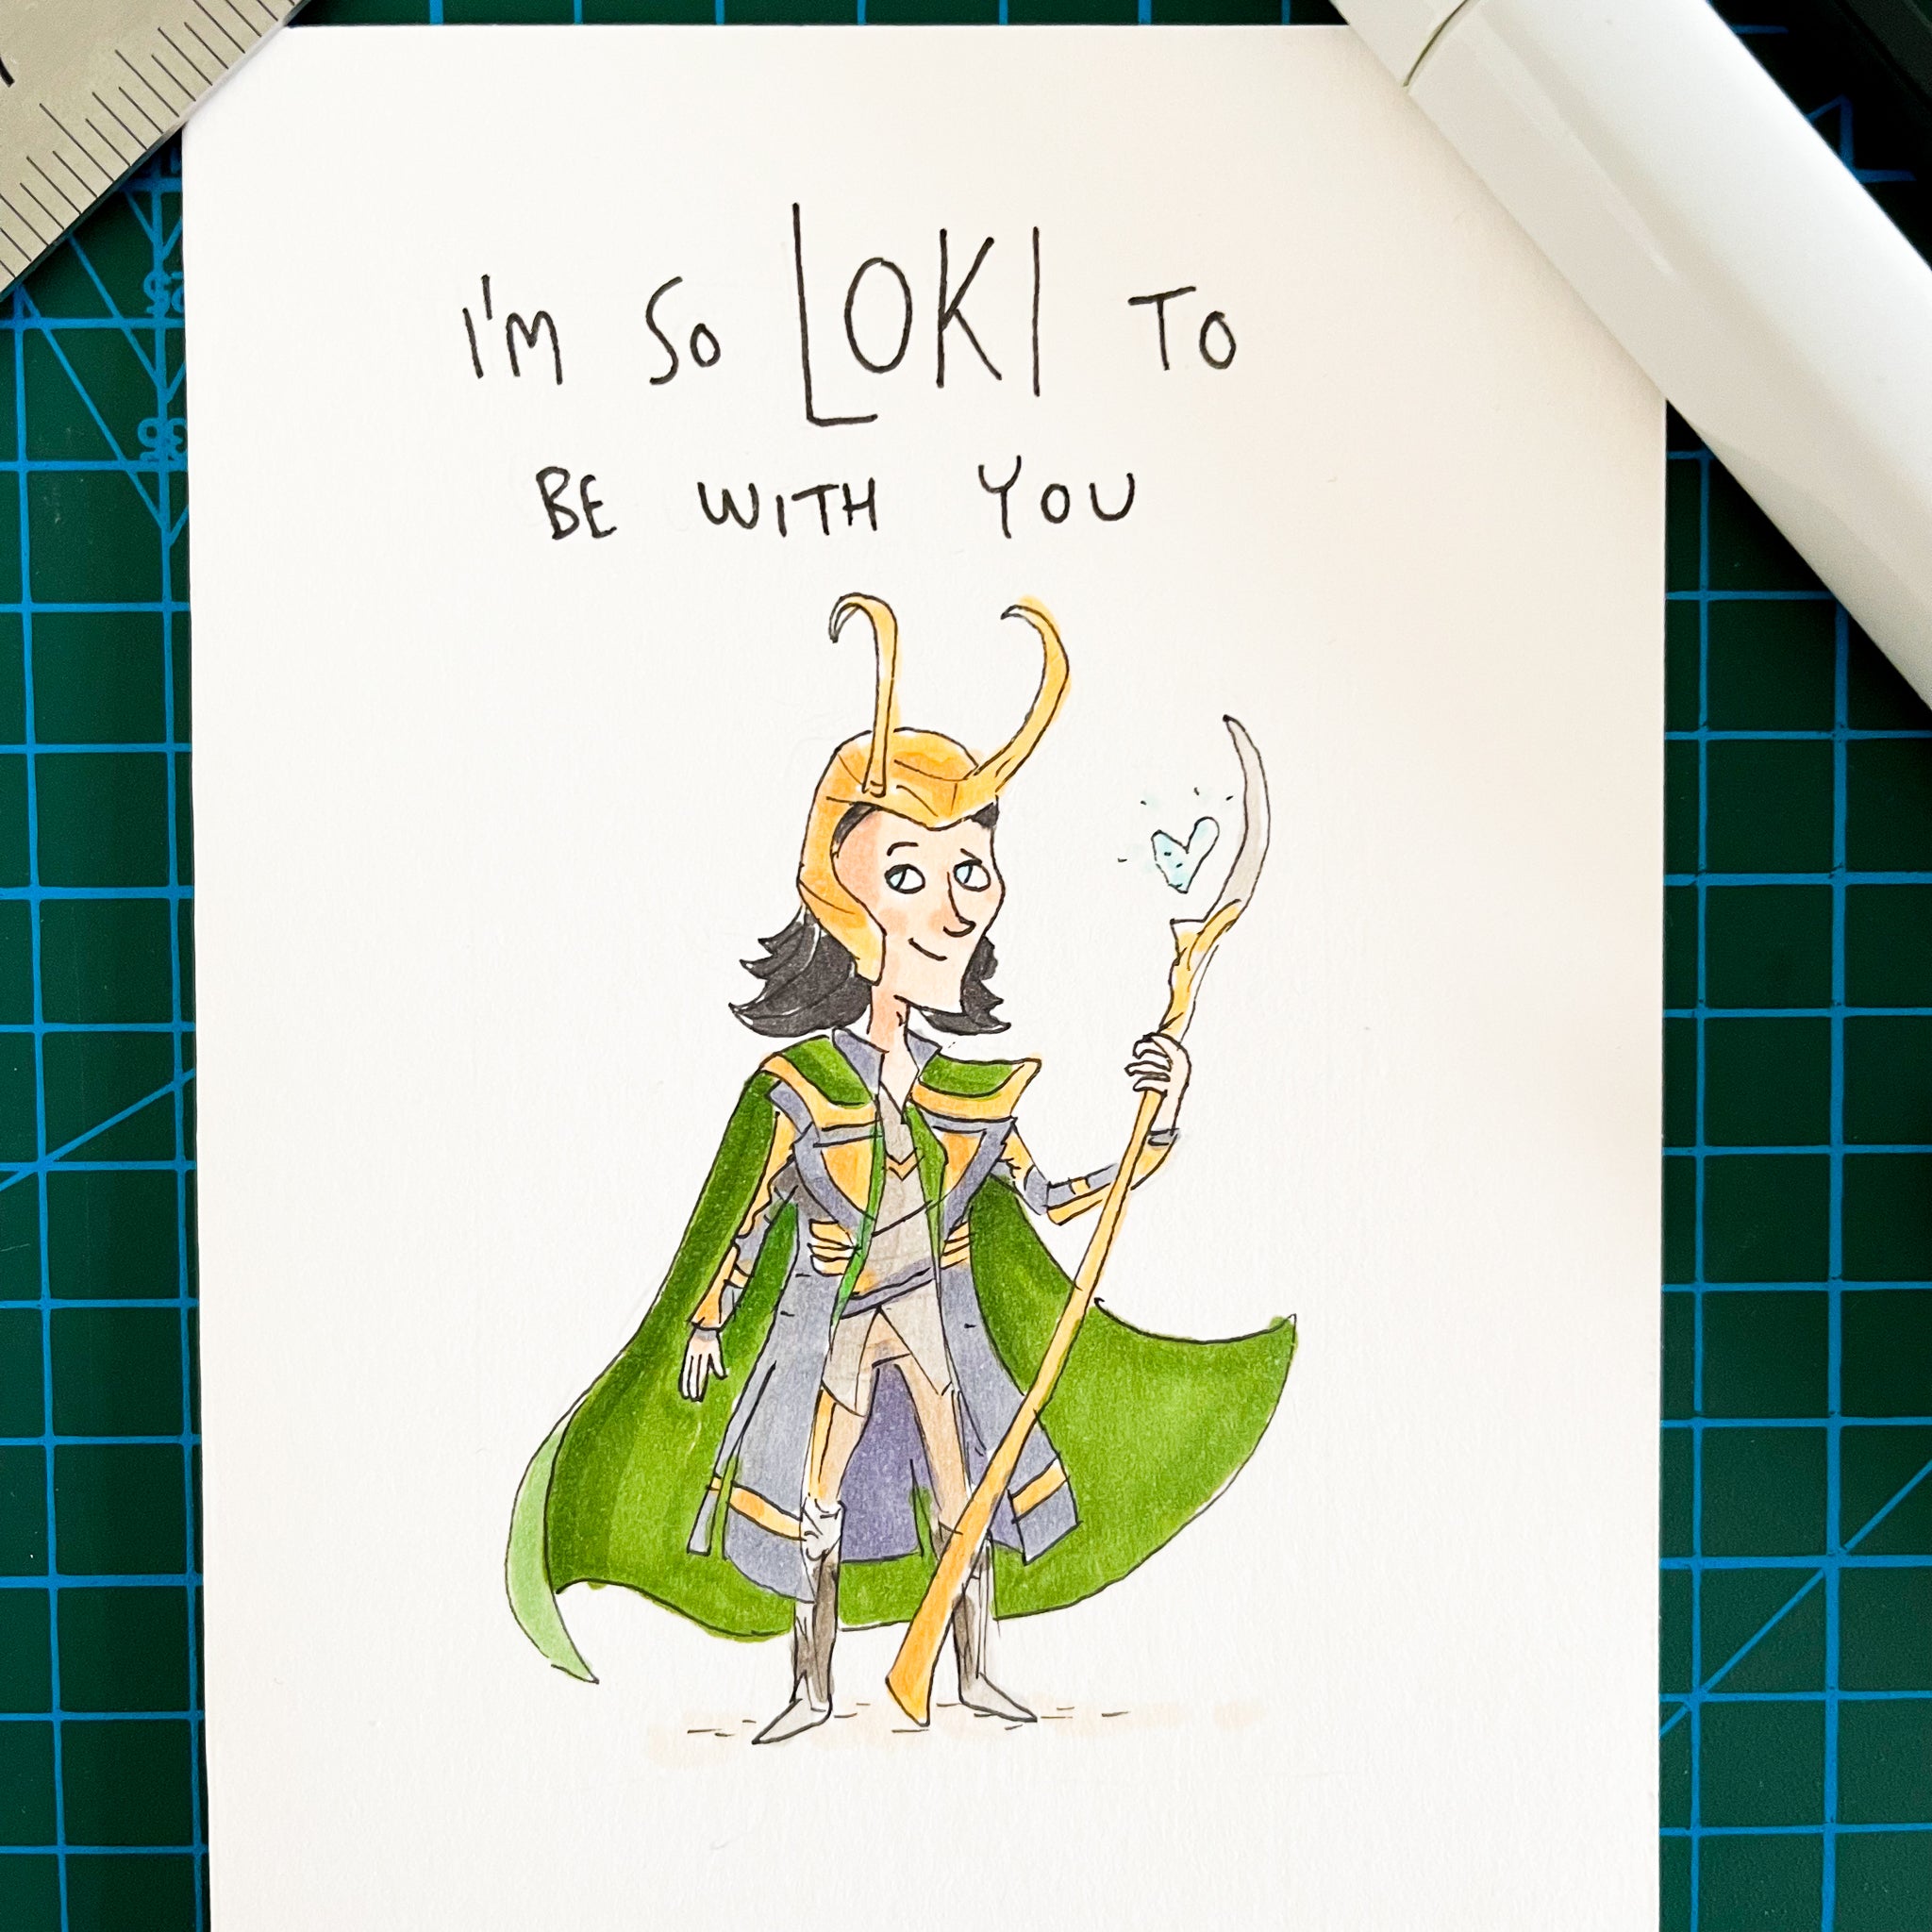 I'm So Loki To Be With You - Well Drawn